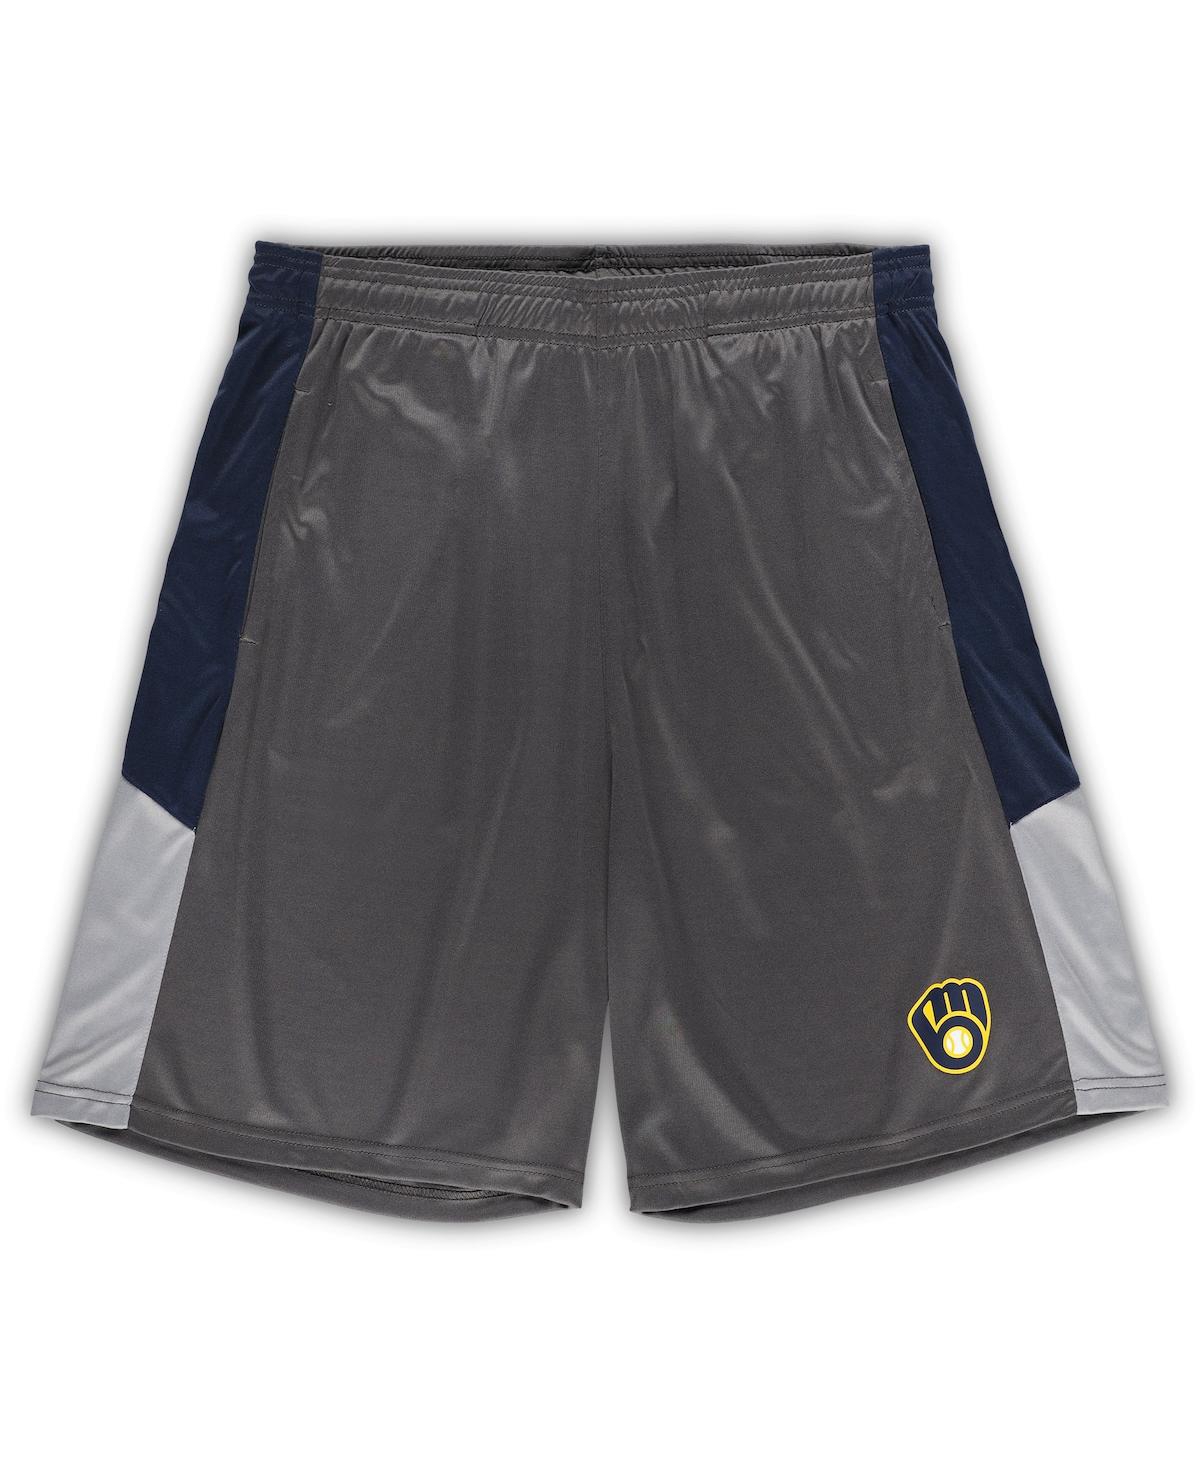 PROFILE MEN'S PROFILE NAVY, GRAY MILWAUKEE BREWERS BIG AND TALL TEAM SHORTS